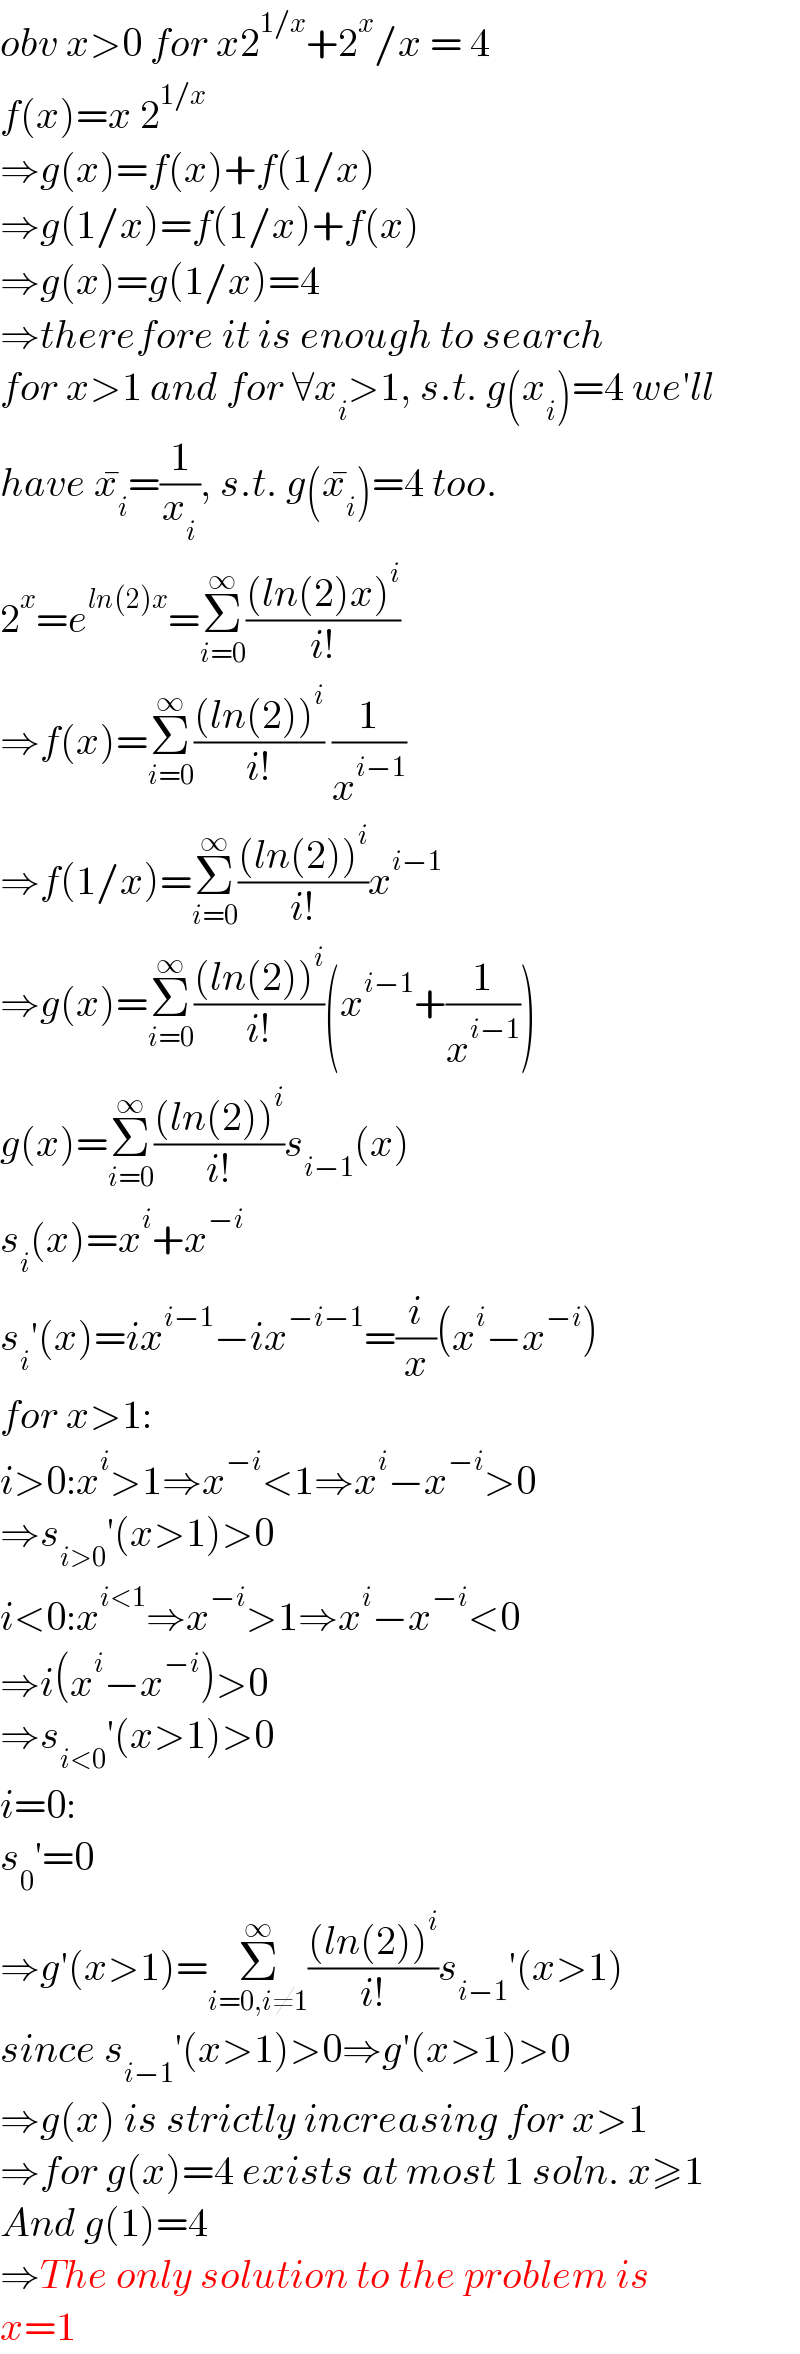 obv x>0 for x2^(1/x) +2^x /x = 4  f(x)=x 2^(1/x)   ⇒g(x)=f(x)+f(1/x)  ⇒g(1/x)=f(1/x)+f(x)  ⇒g(x)=g(1/x)=4  ⇒therefore it is enough to search  for x>1 and for ∀x_i >1, s.t. g(x_i )=4 we′ll  have x_i ^� =(1/x_i ), s.t. g(x_i ^� )=4 too.  2^x =e^(ln(2)x) =Σ_(i=0) ^∞ (((ln(2)x)^i )/(i!))  ⇒f(x)=Σ_(i=0) ^∞ (((ln(2))^i )/(i!)) (1/x^(i−1) )  ⇒f(1/x)=Σ_(i=0) ^∞ (((ln(2))^i )/(i!))x^(i−1)   ⇒g(x)=Σ_(i=0) ^∞ (((ln(2))^i )/(i!))(x^(i−1) +(1/x^(i−1) ))  g(x)=Σ_(i=0) ^∞ (((ln(2))^i )/(i!))s_(i−1) (x)  s_i (x)=x^i +x^(−i)   s_i ′(x)=ix^(i−1) −ix^(−i−1) =(i/x)(x^i −x^(−i) )  for x>1:  i>0:x^i >1⇒x^(−i) <1⇒x^i −x^(−i) >0  ⇒s_(i>0) ′(x>1)>0  i<0:x^(i<1) ⇒x^(−i) >1⇒x^i −x^(−i) <0  ⇒i(x^i −x^(−i) )>0  ⇒s_(i<0) ′(x>1)>0  i=0:  s_0 ′=0  ⇒g′(x>1)=Σ_(i=0,i≠1) ^∞ (((ln(2))^i )/(i!))s_(i−1) ′(x>1)  since s_(i−1) ′(x>1)>0⇒g′(x>1)>0  ⇒g(x) is strictly increasing for x>1  ⇒for g(x)=4 exists at most 1 soln. x≥1  And g(1)=4  ⇒The only solution to the problem is  x=1  